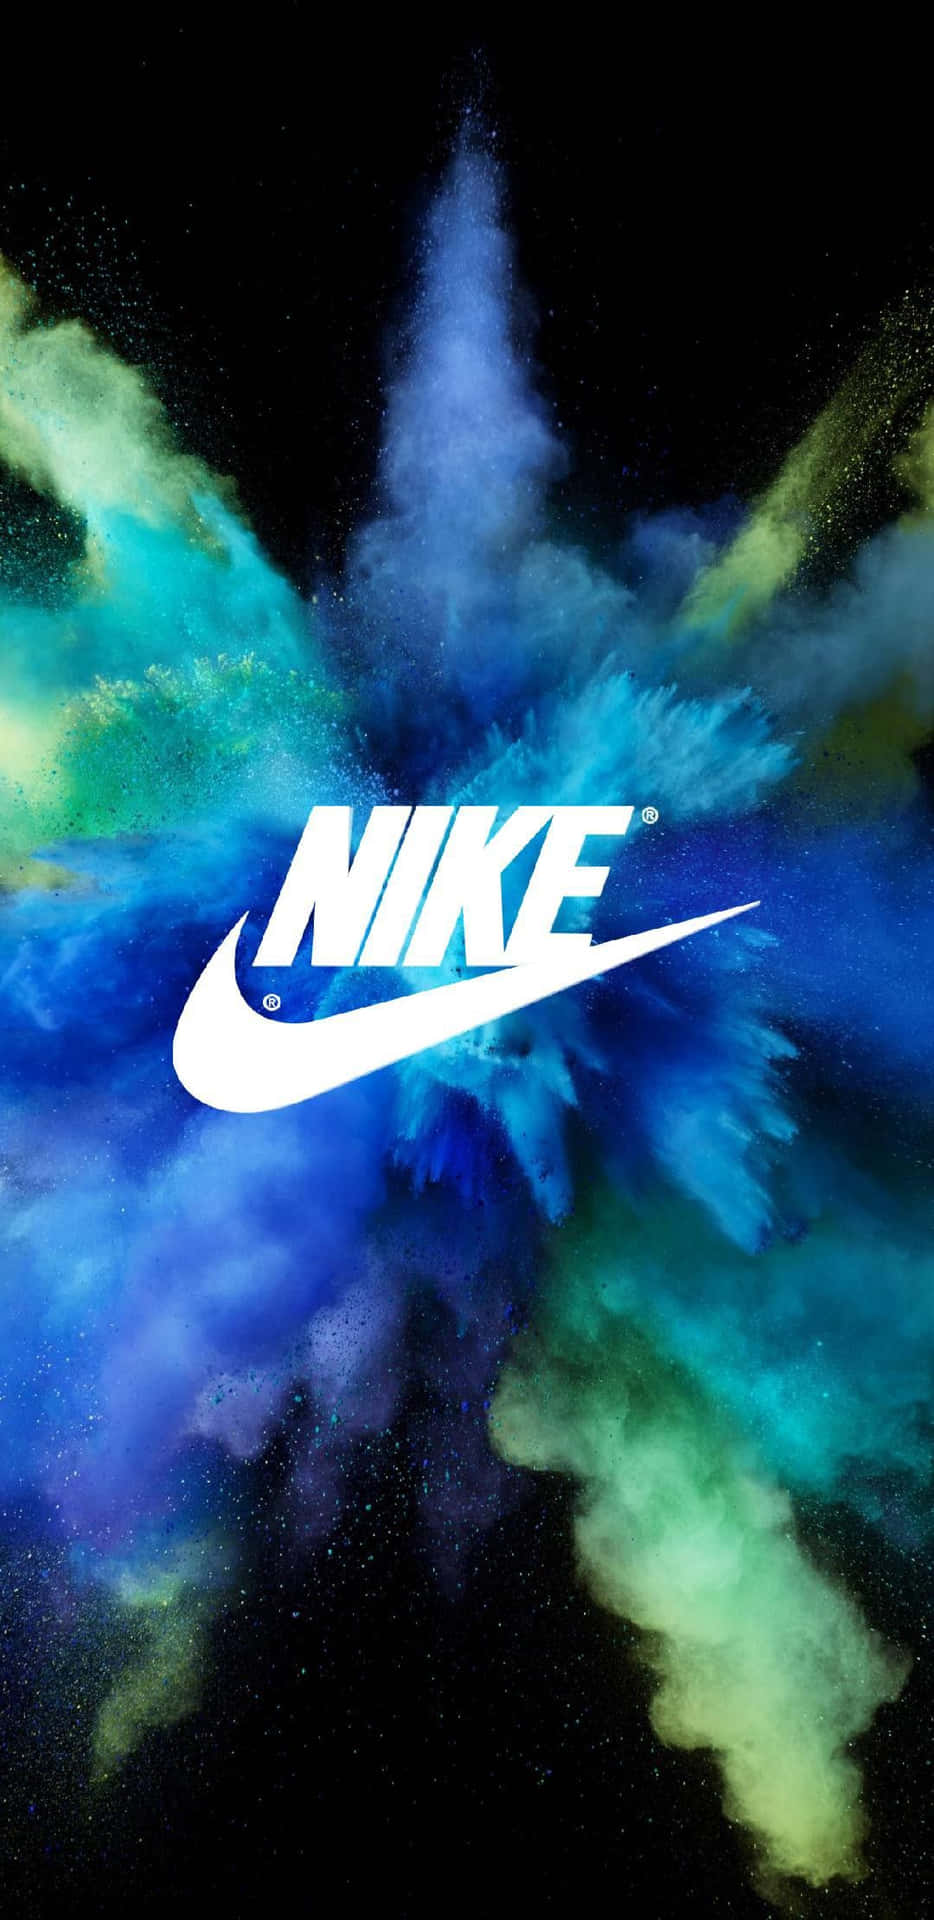 Nike Logo On A Black Background With Colorful Powder Wallpaper